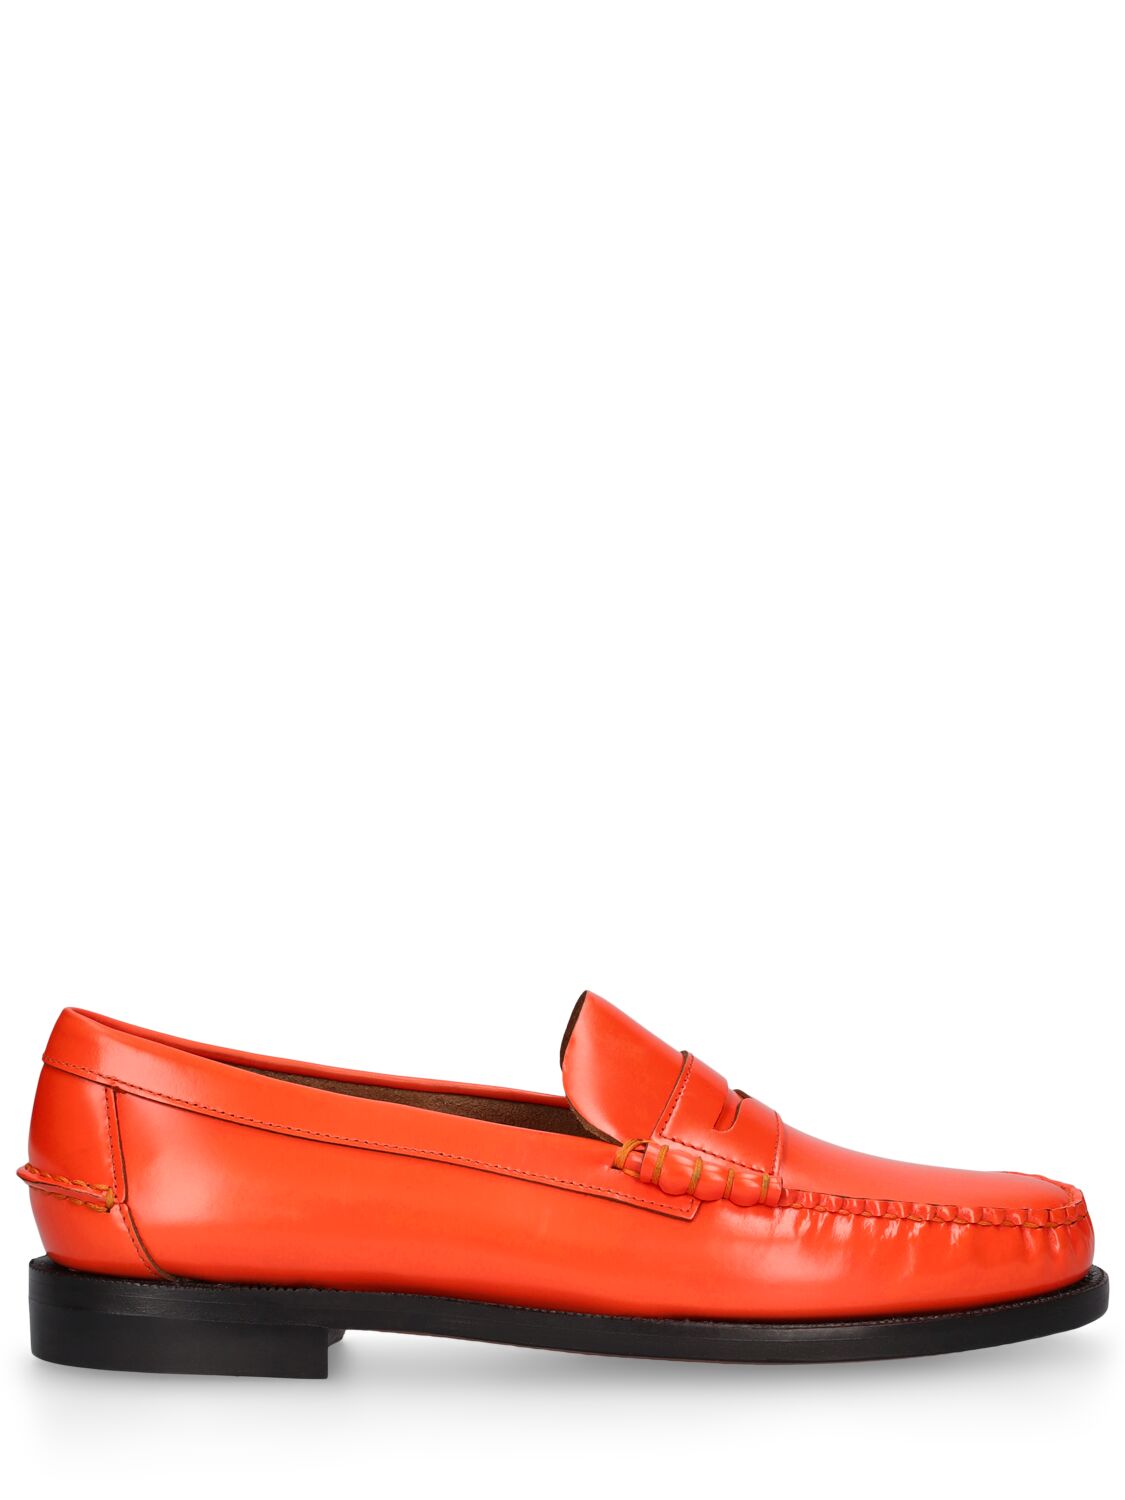 Sebago Dan Outsides Smooth Leather Loafers In Orange